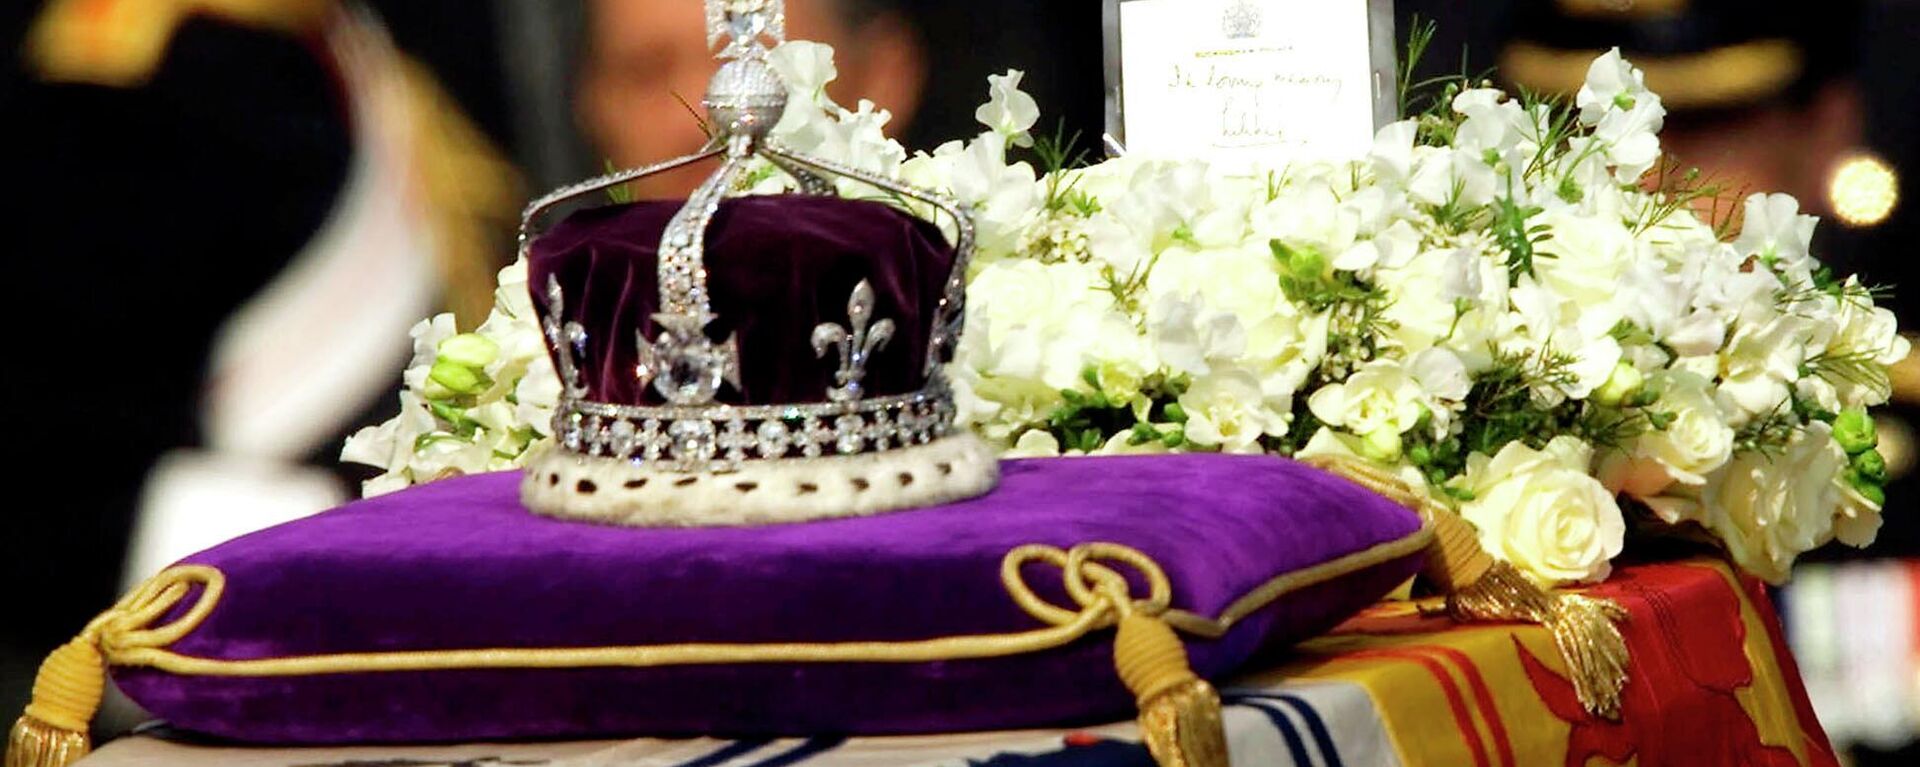 FILE - The Koh-i-noor, or mountain of light, diamond, set in the Maltese Cross at the front of the crown made for Britain's late Queen Mother Elizabeth, is seen on her coffin, along with her personal standard, a wreath and a note from her daughter, Queen Elizabeth II, as it is drawn to London's Westminster Hall in this April 5, 2002. Hundreds of thousands of people are expected to flock to London’s medieval Westminster Hall from Wednesday, Sept. 14, 2022, to pay their respects to Queen Elizabeth II, whose coffin will lie in state for four days until her funeral on Monday. (AP Photo/Alastair Grant, File) - Sputnik International, 1920, 16.09.2022